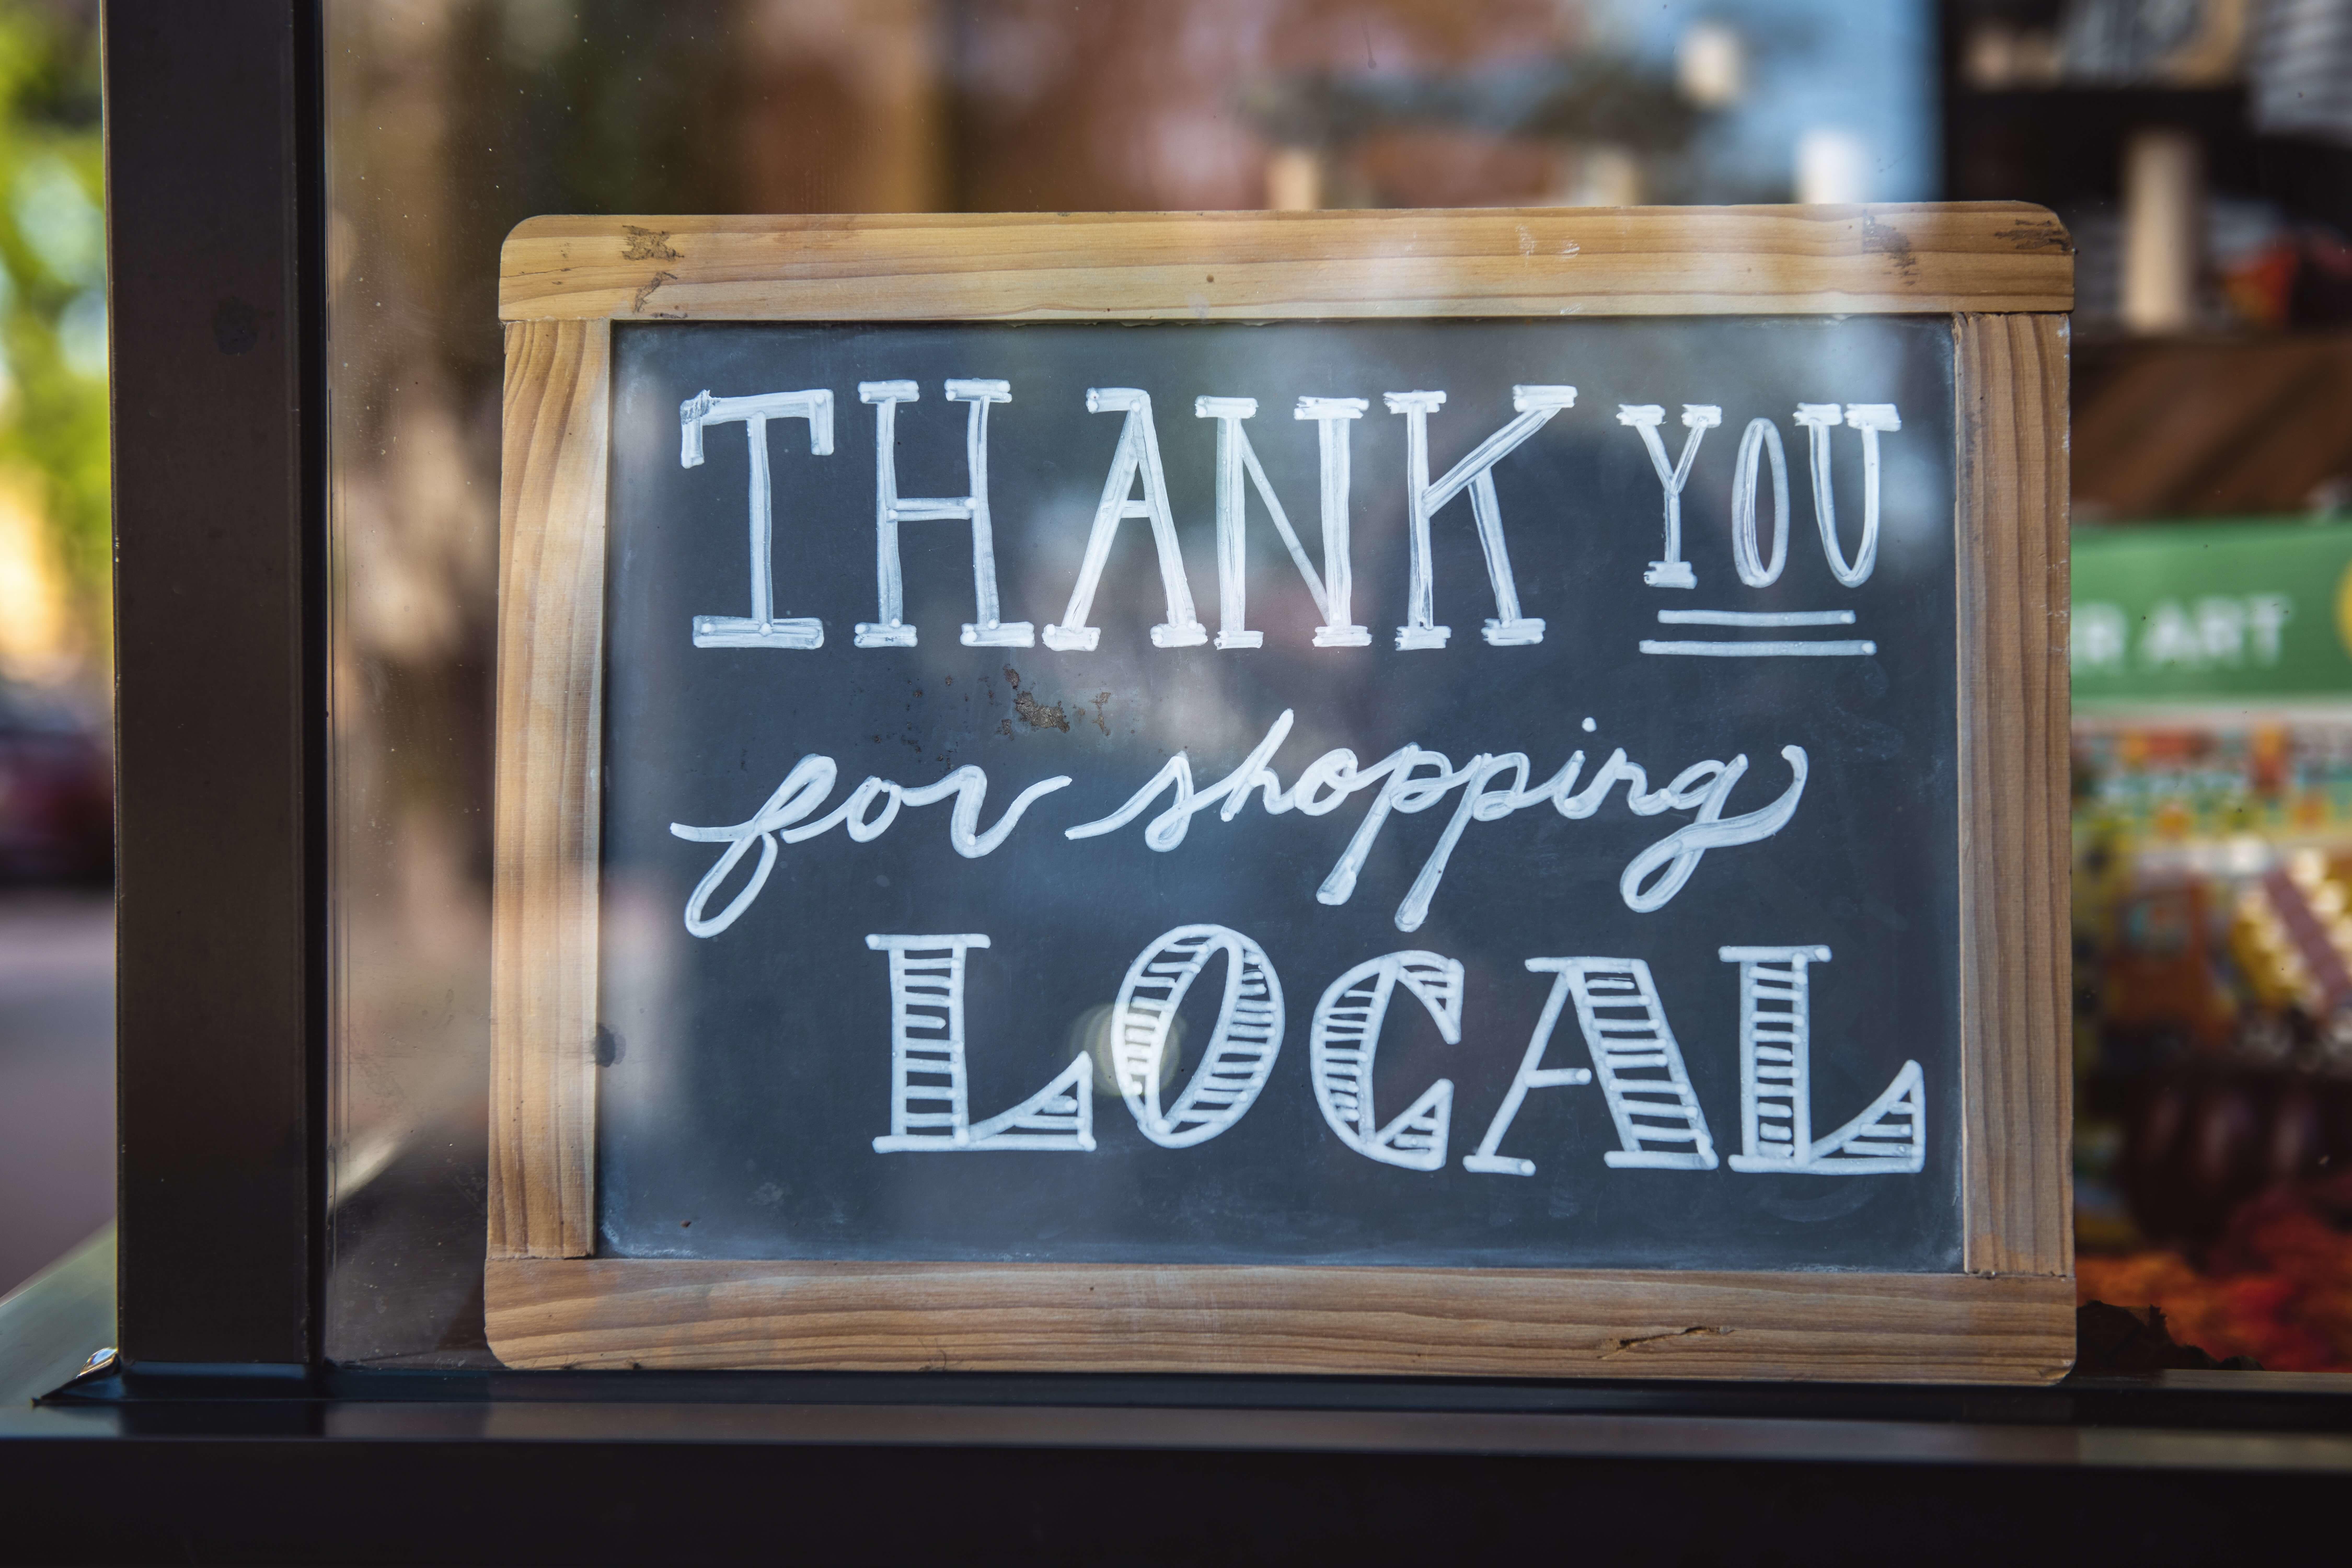 Chalkboard reading: Thank you for shopping local